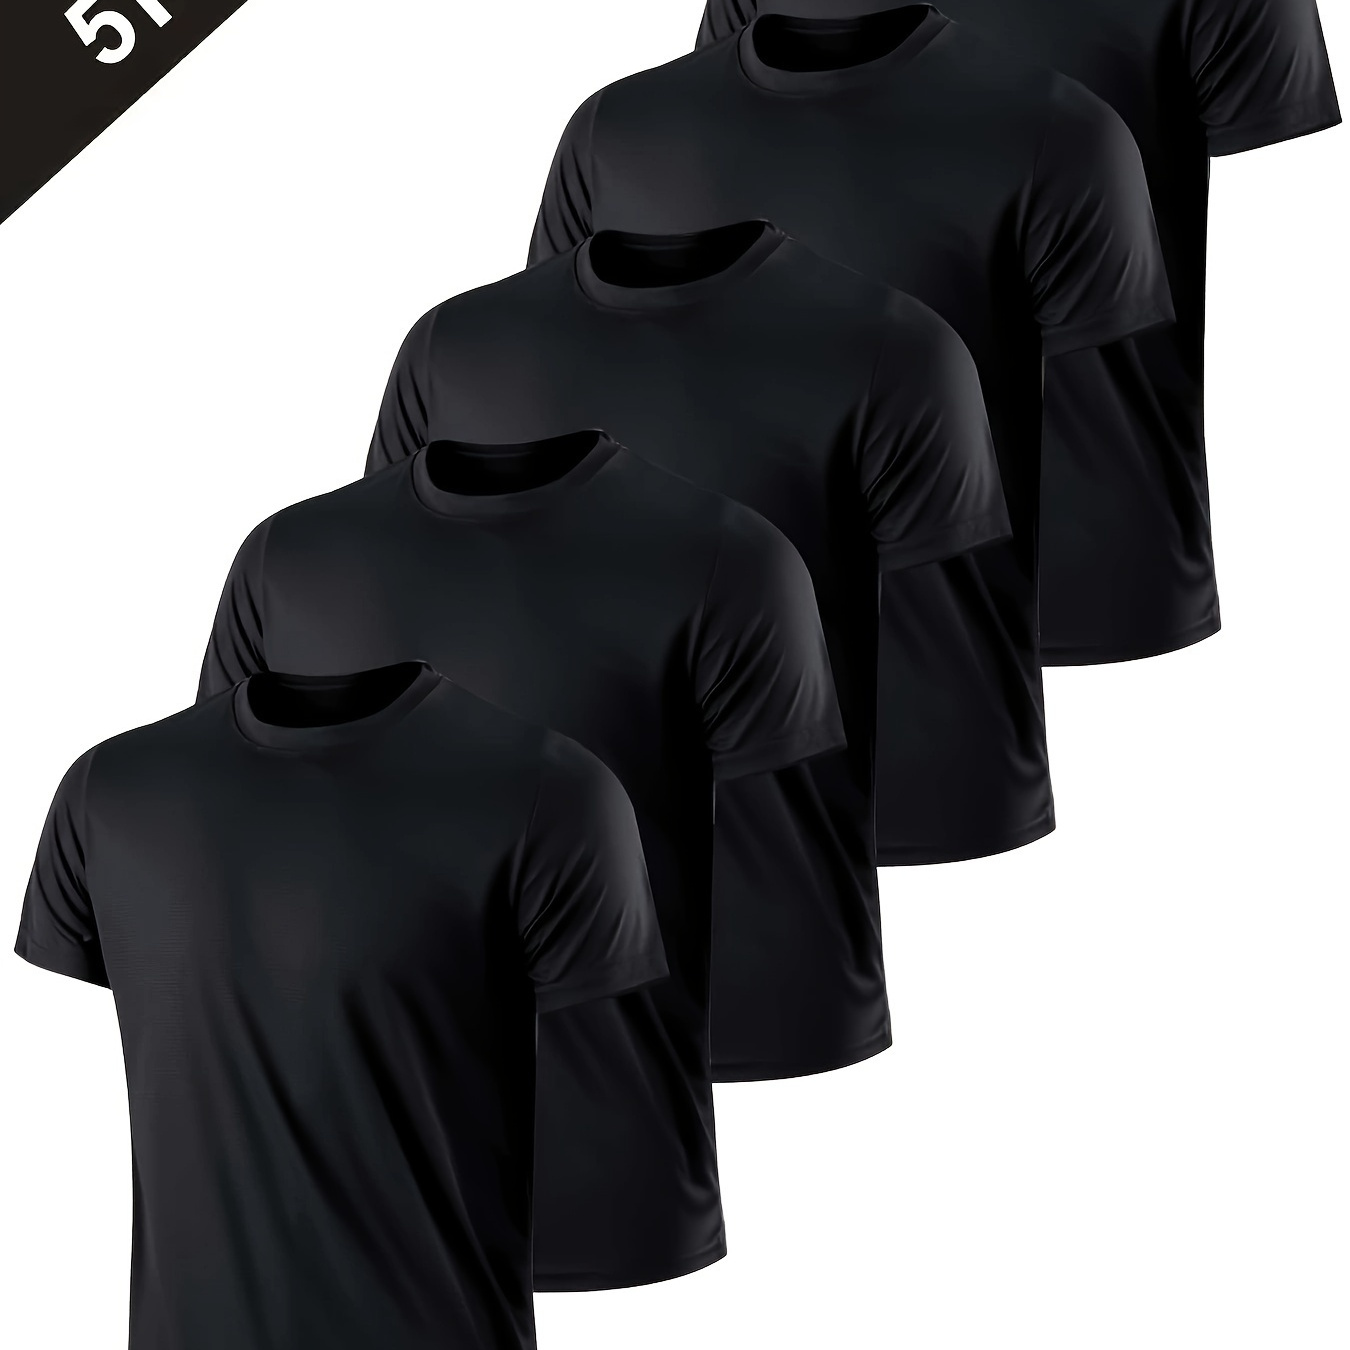 

Five-piece Round Neck Quick-dry T-shirt For Men Outside The Gym